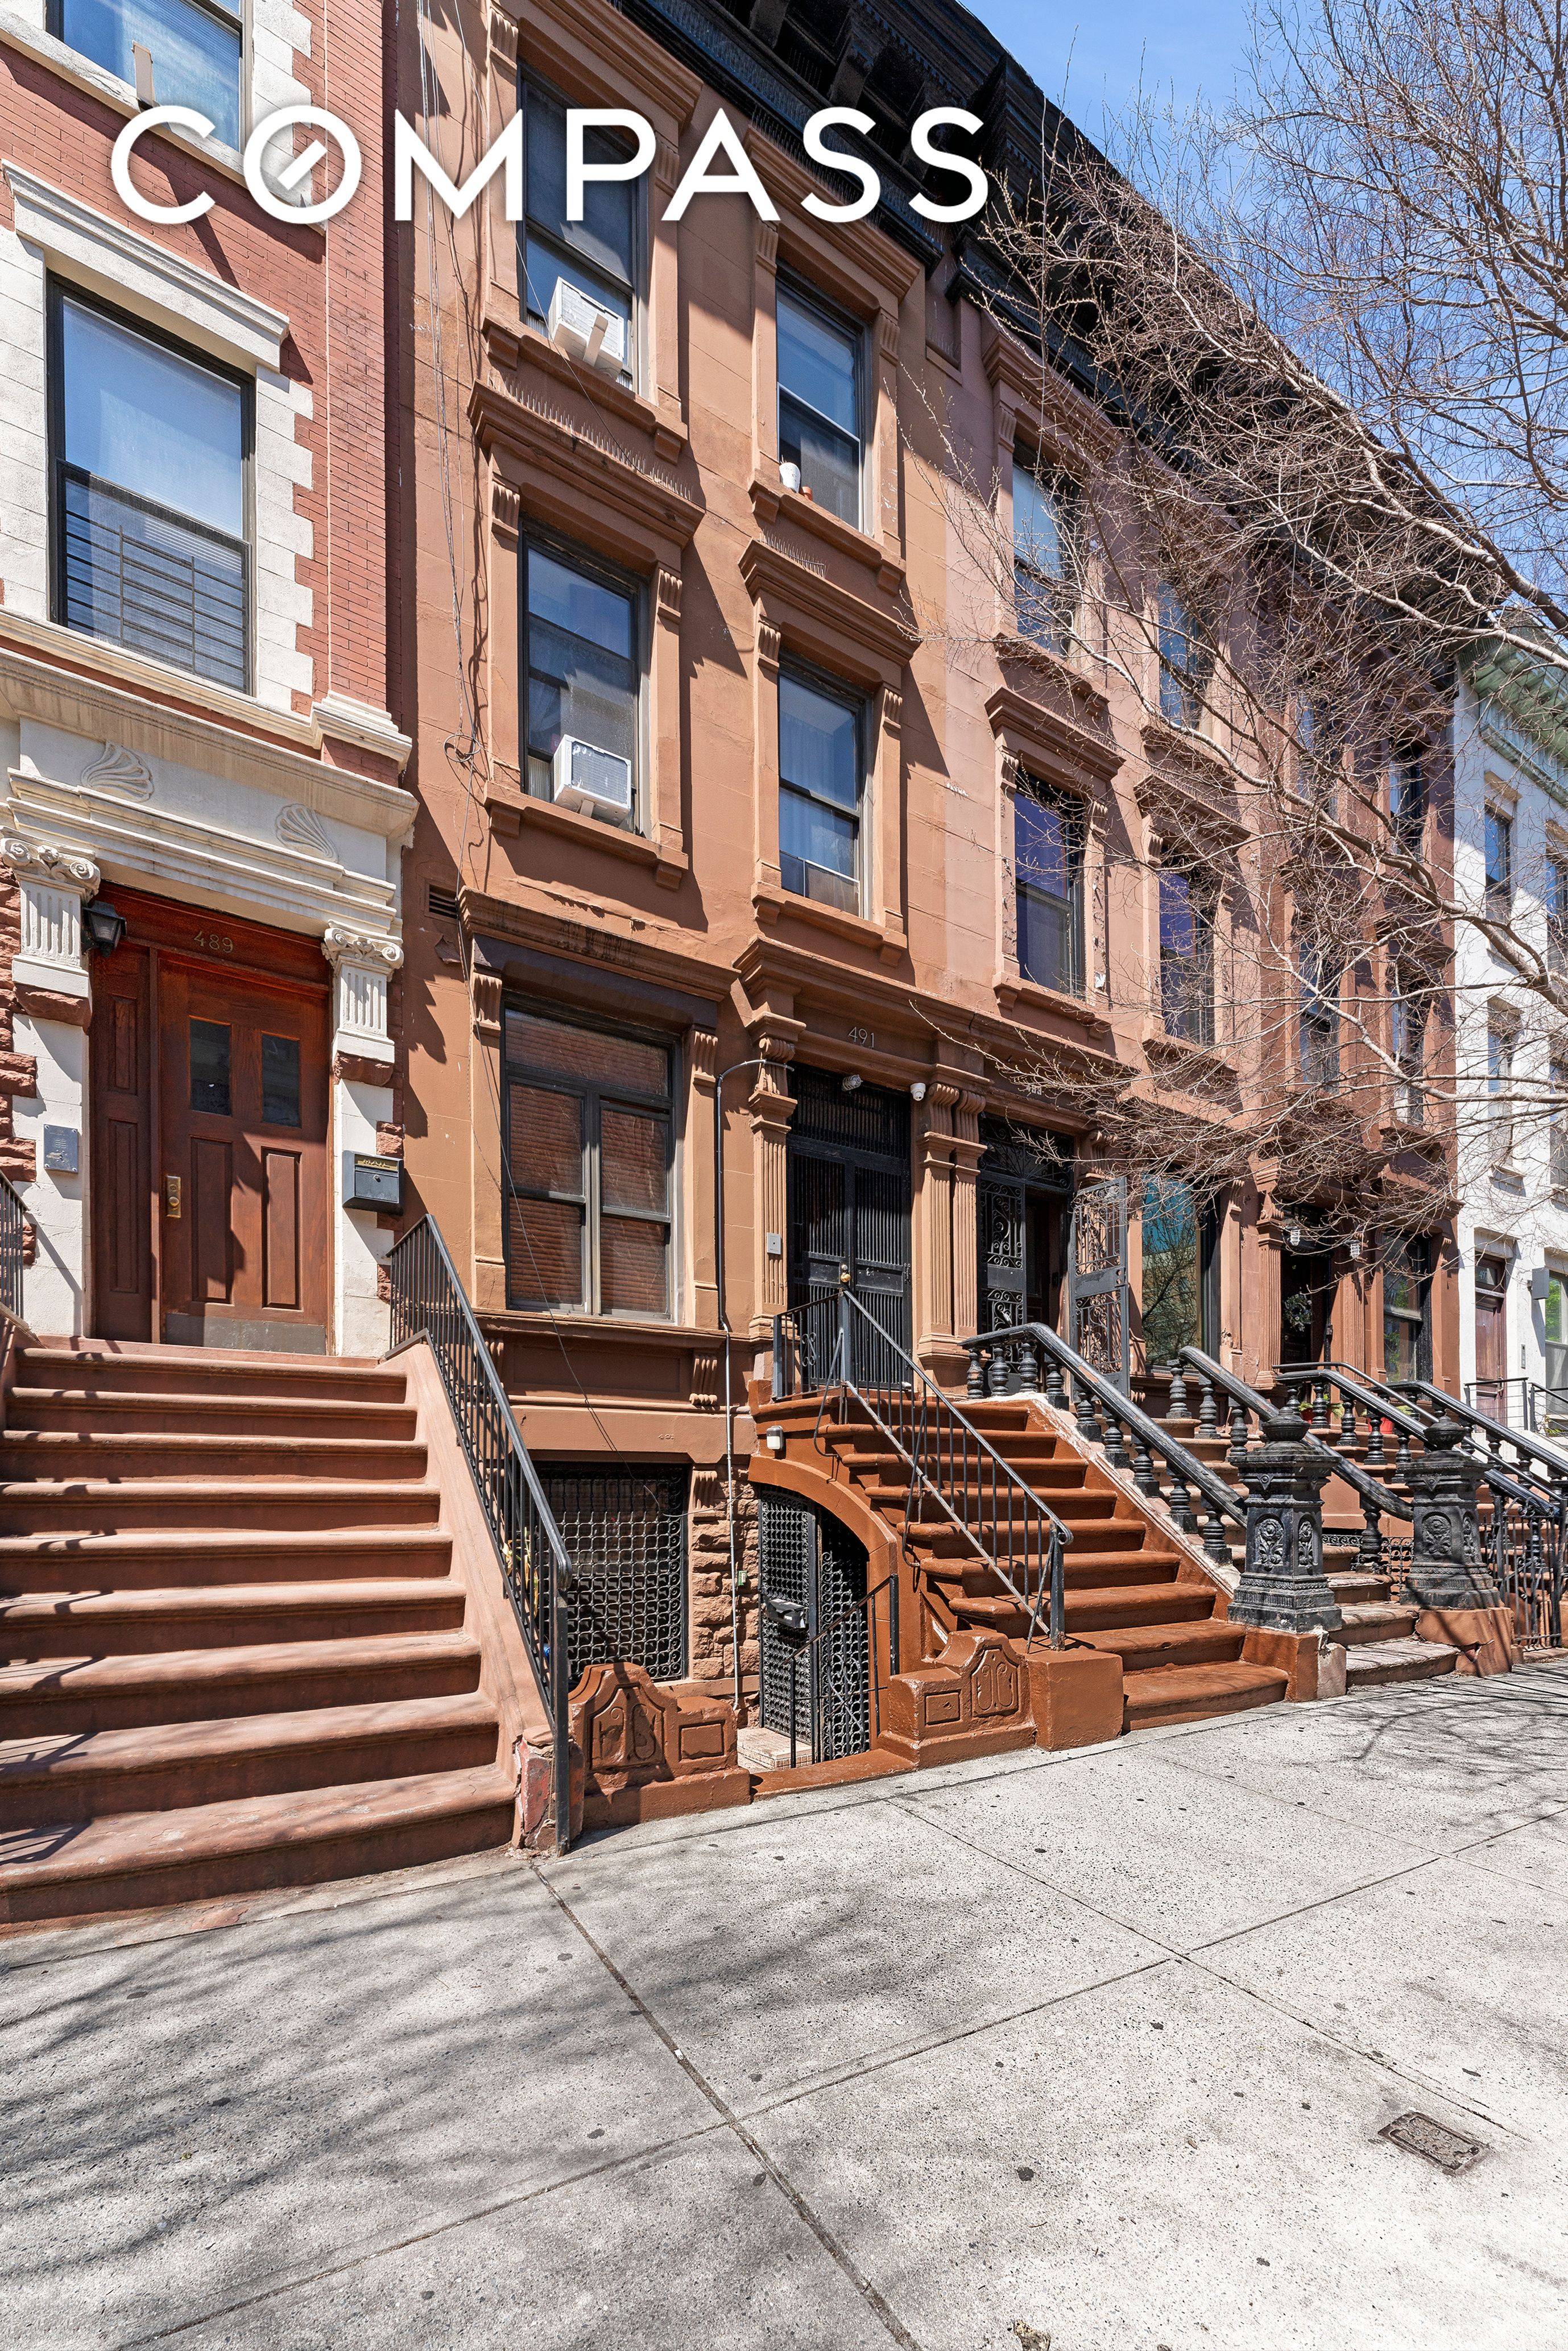 491 Manhattan Avenue is a 3 story apartment building located on a tree lined street in Harlem.